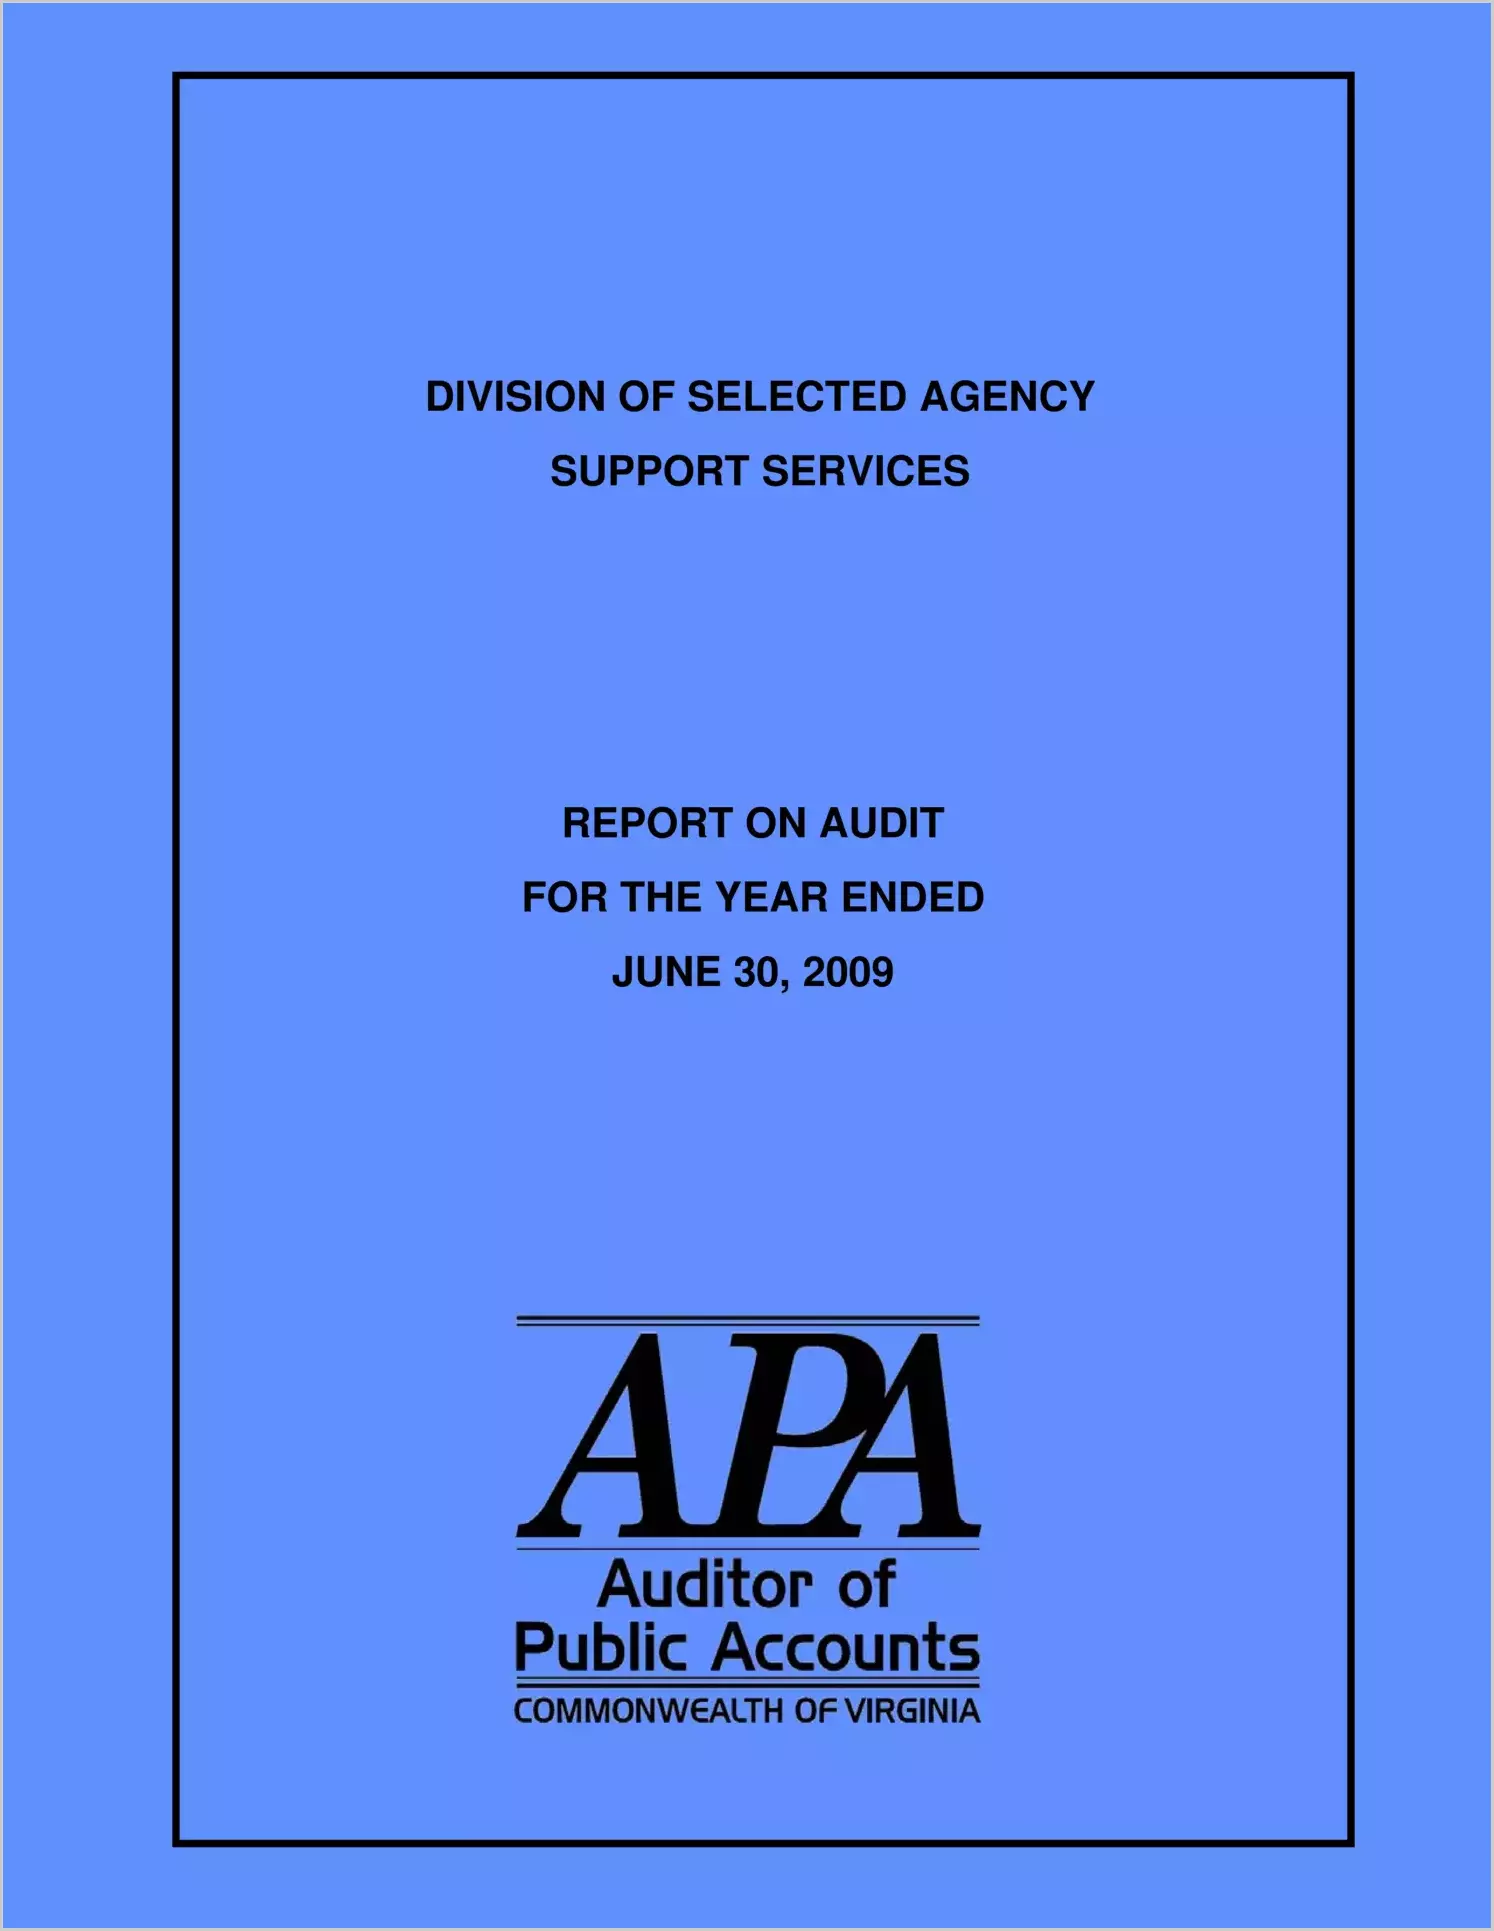 Division of Selected Agency Support Services for the year ended June 30, 2009